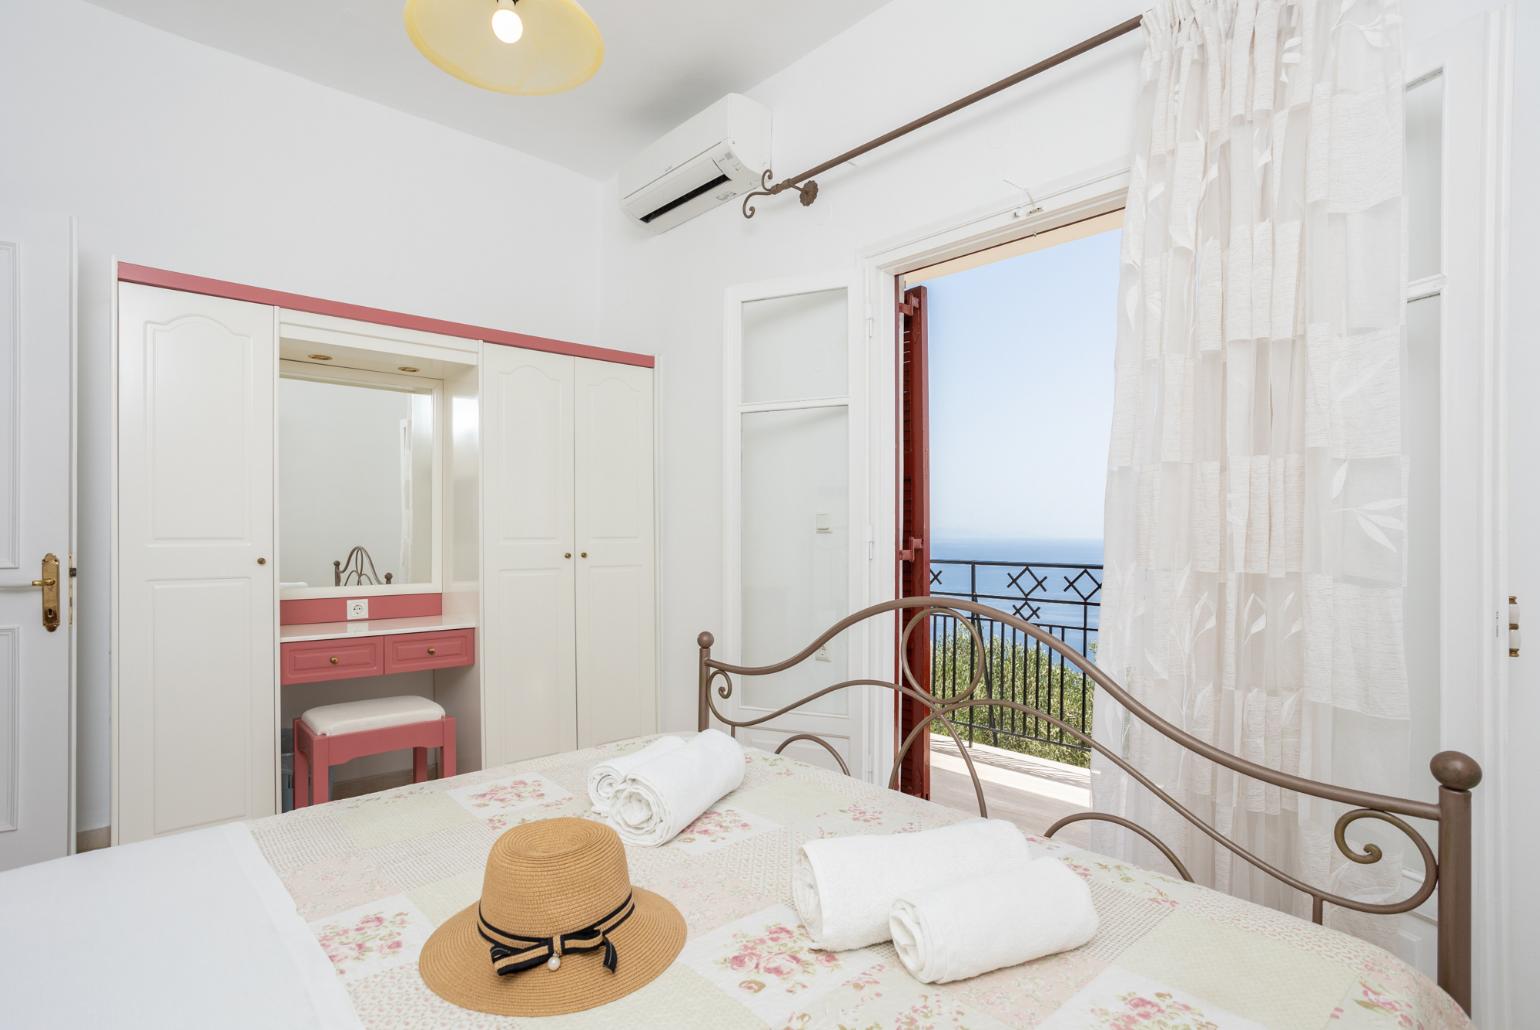 Double bedroom with A/C and balcony access with sea views